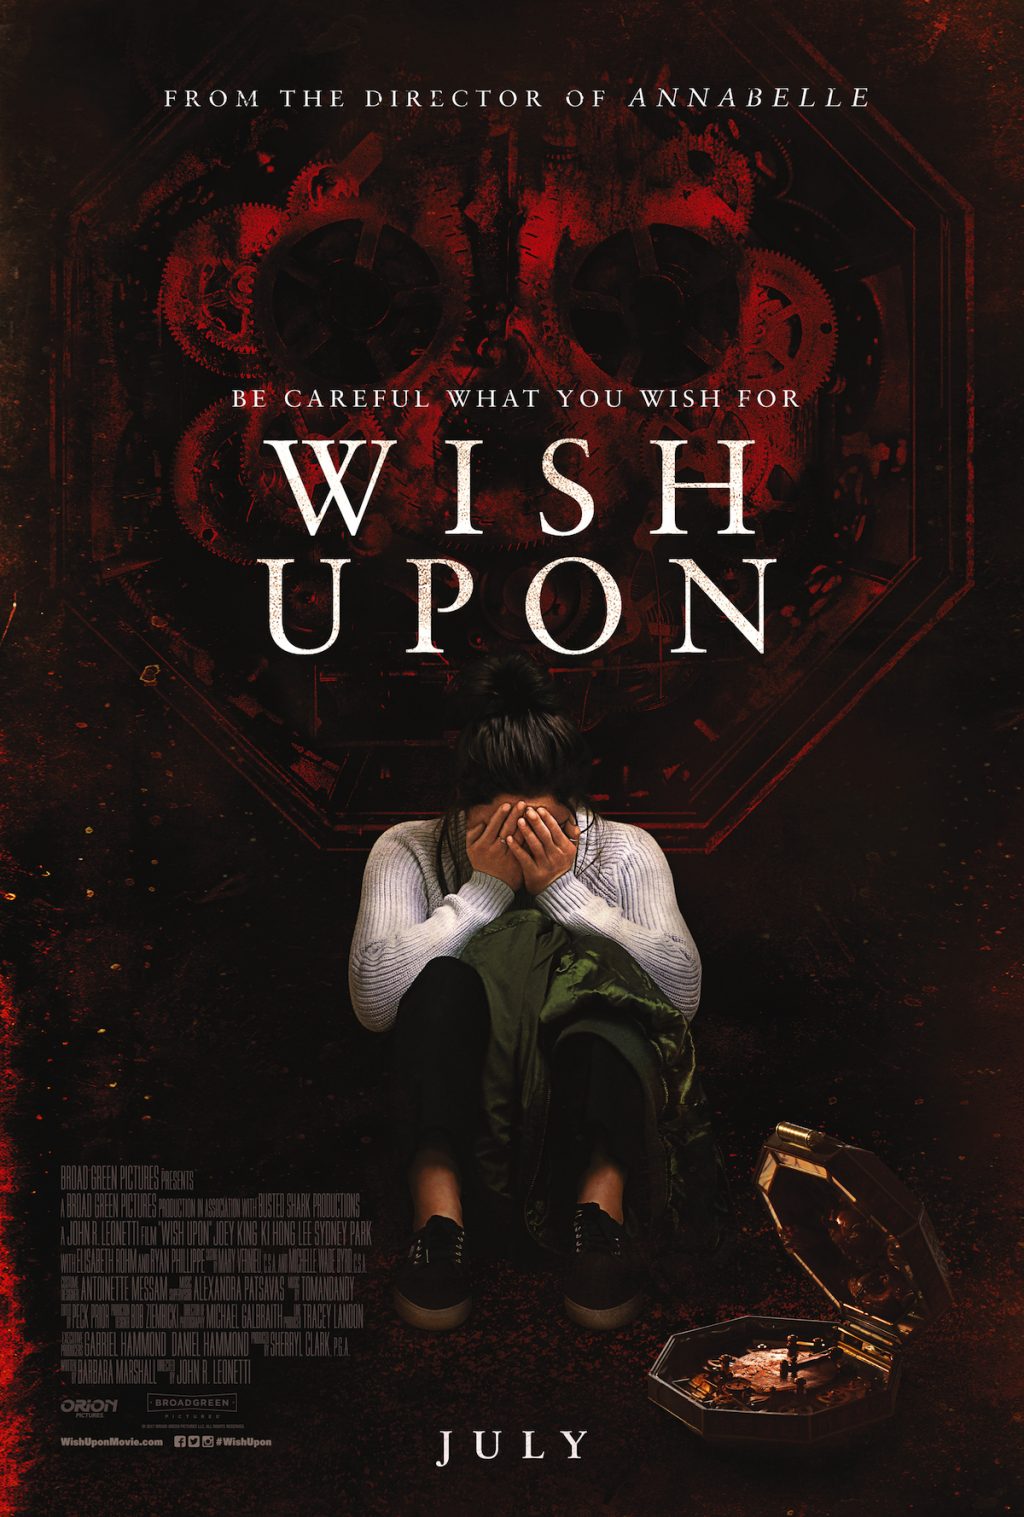 Wish Upon (2017) Poster - Horror Movies Photo (40446423) - Fanpop